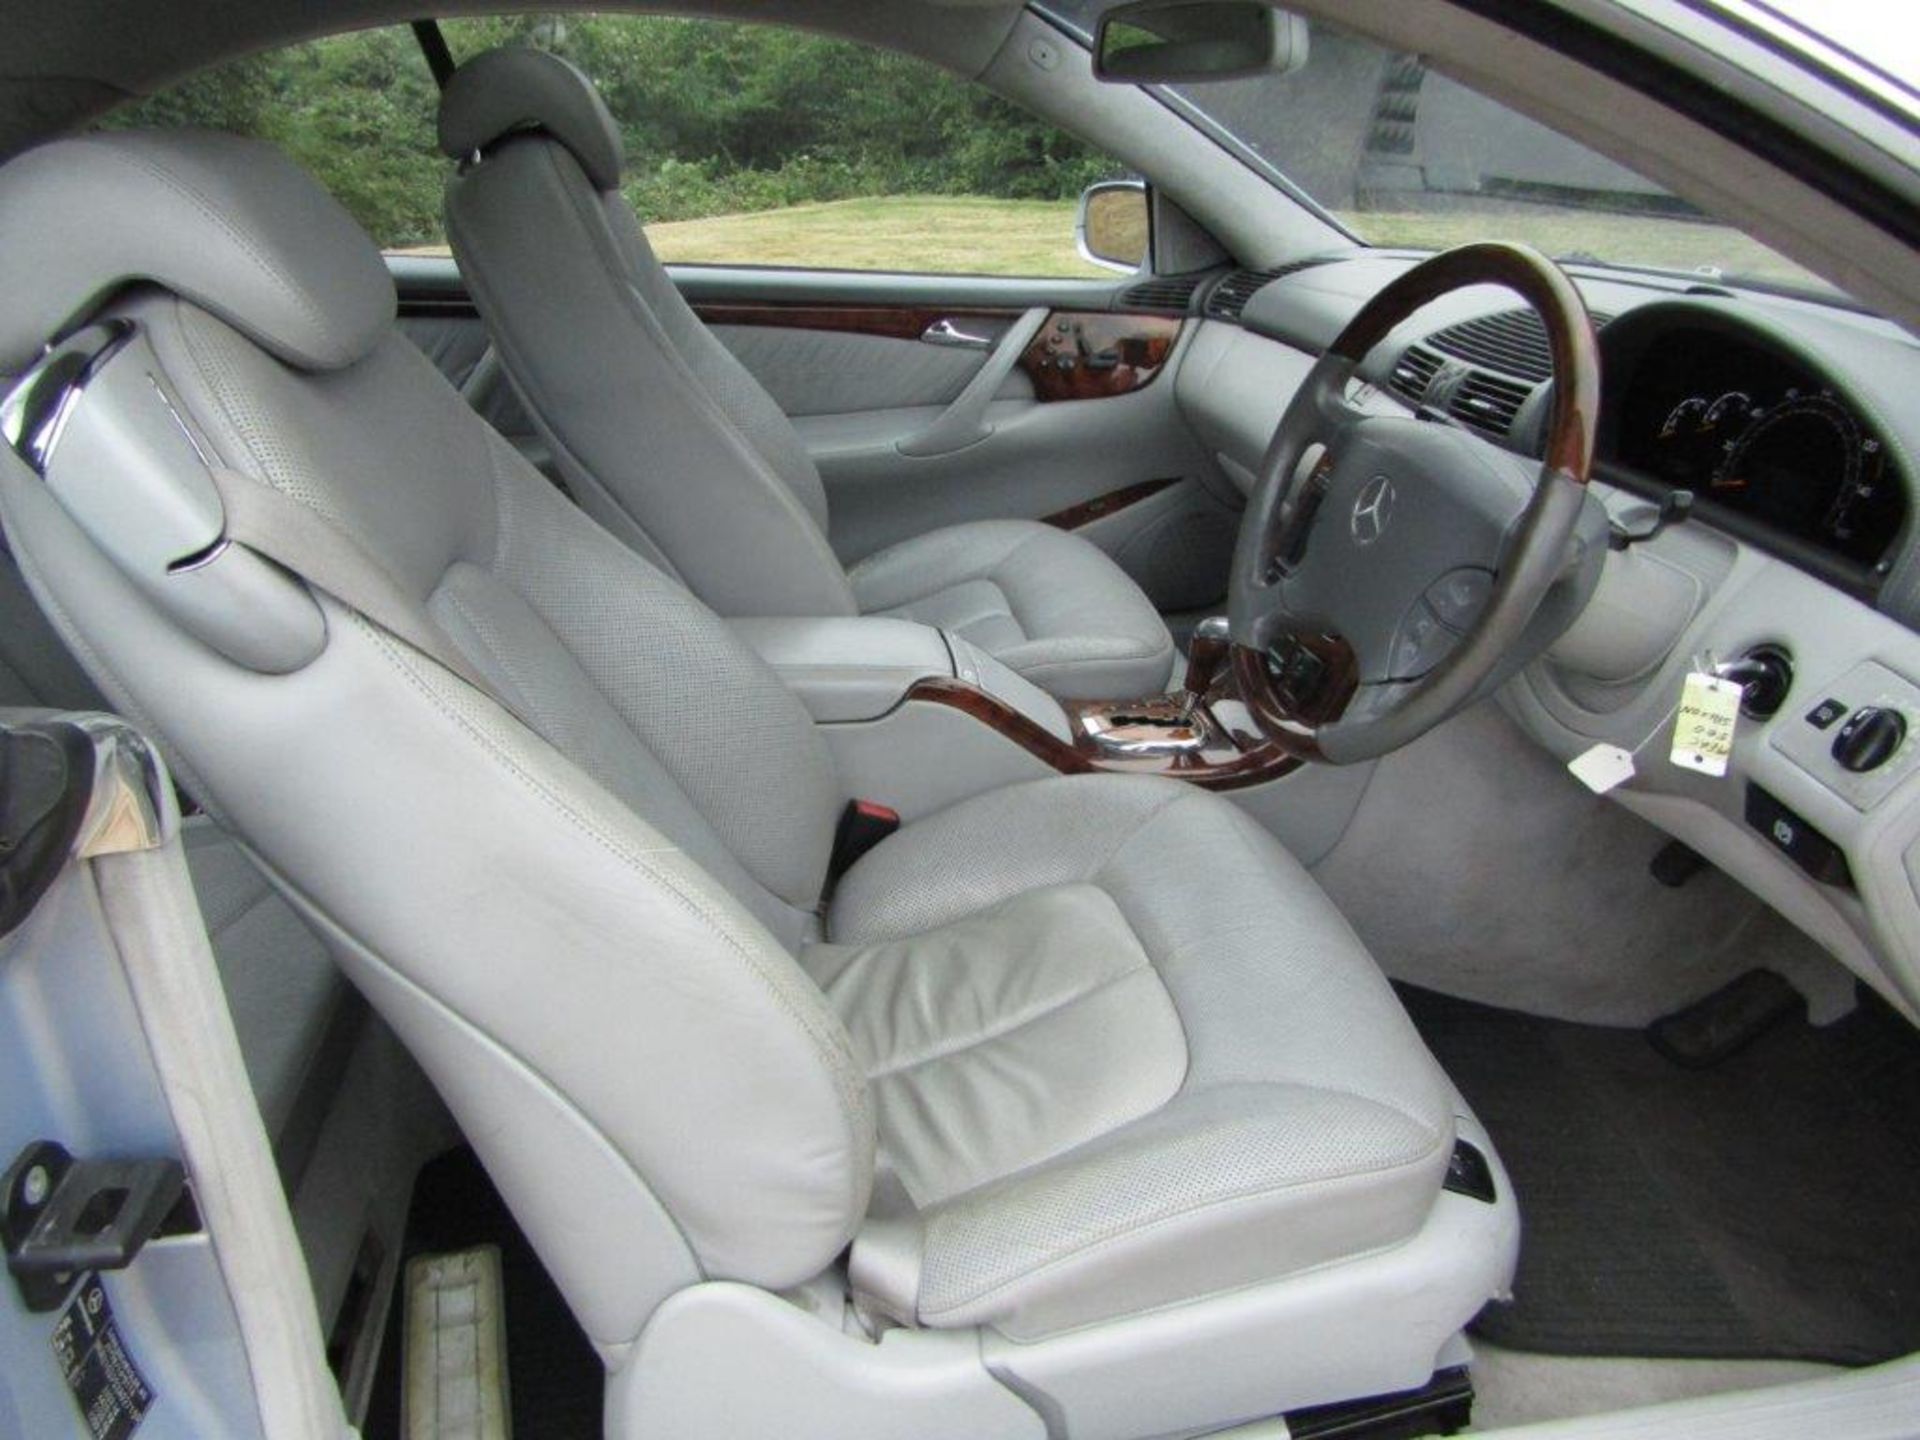 2002 Mercedes CL500 Coupe - Image 7 of 12